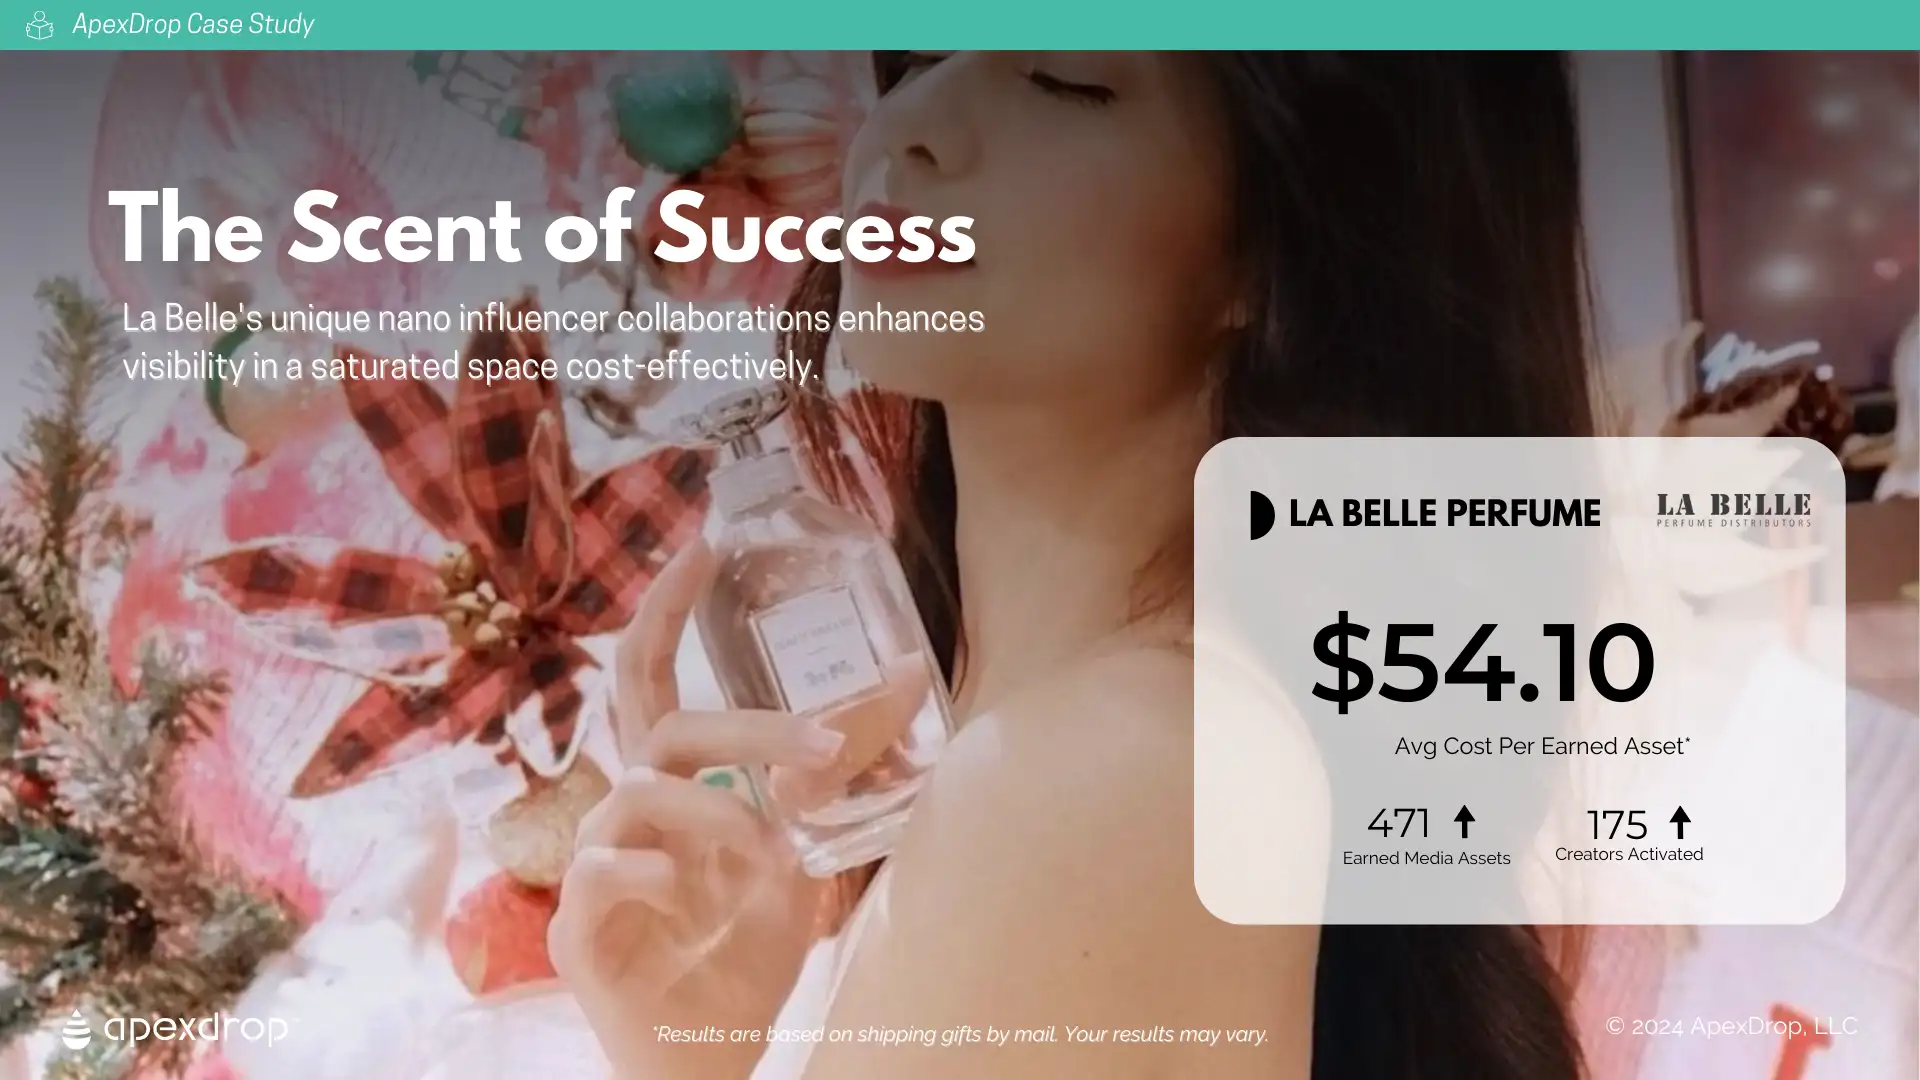 The Scent of Success - La Belle Perfume's unique nano influencer collaborations enhances visibility in a saturated space cost-effectively.